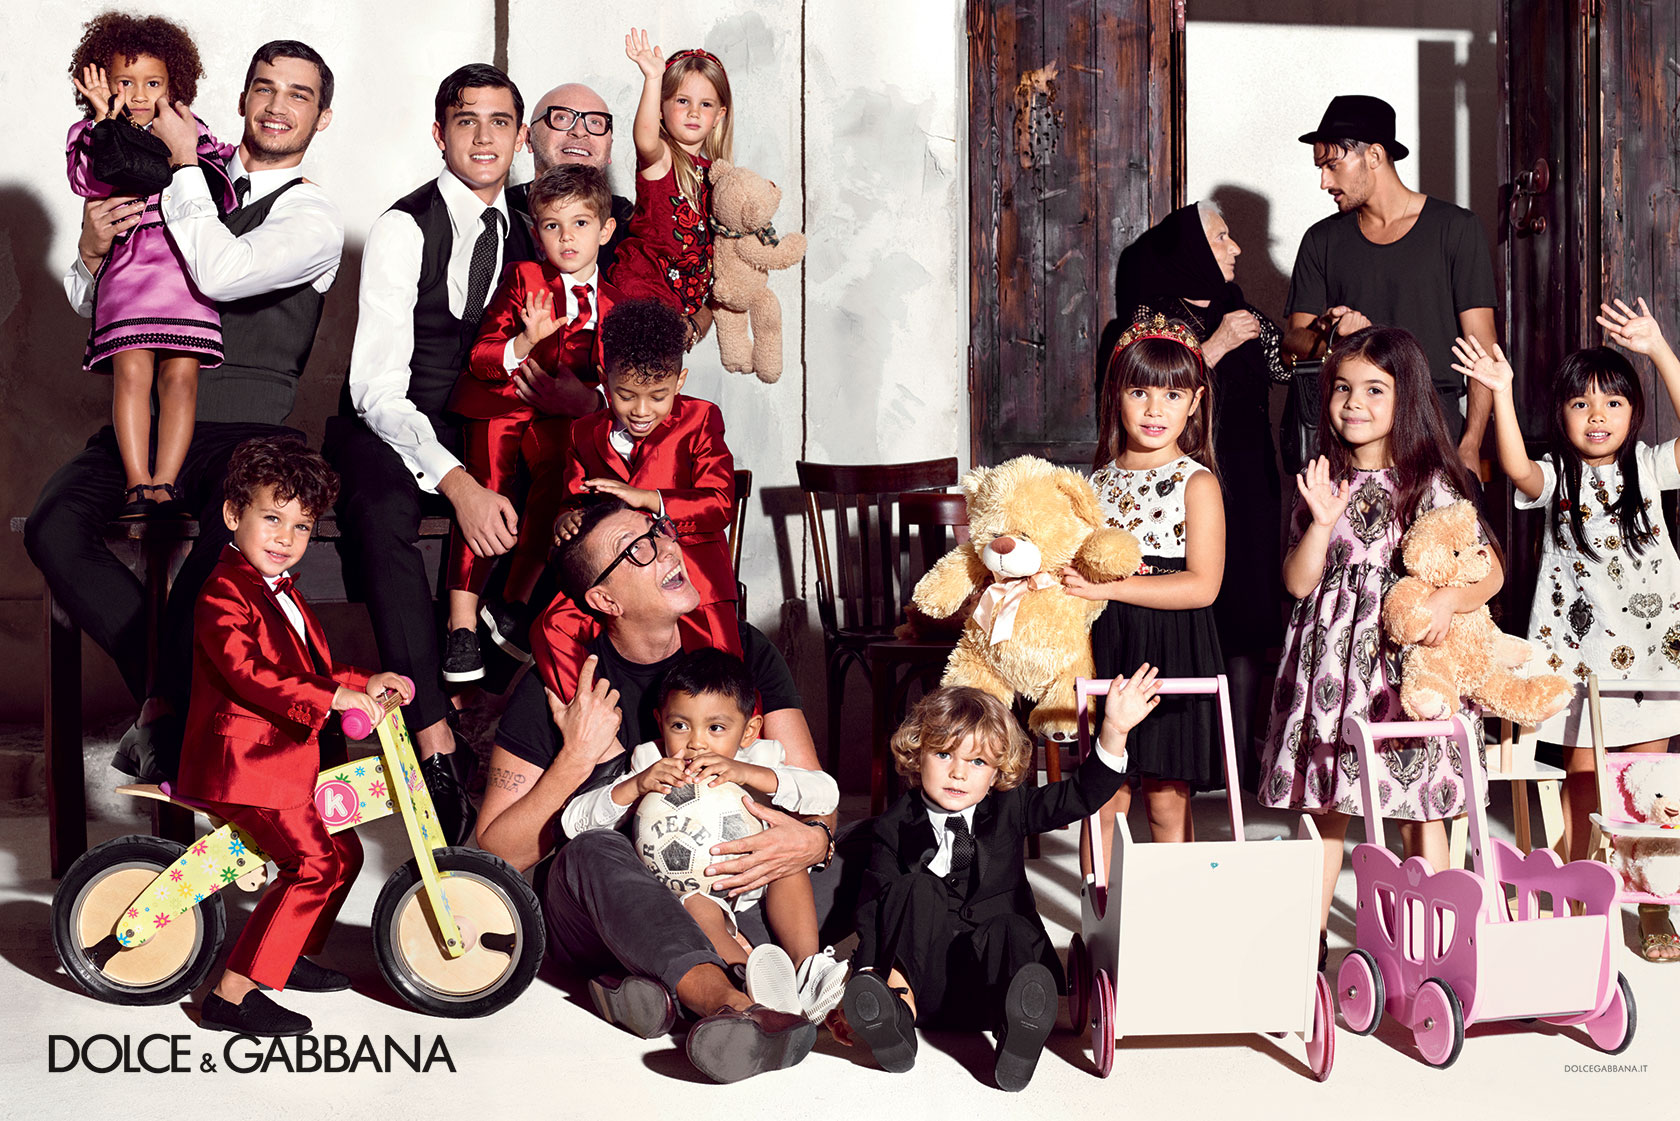 dolce-and-gabbana-summer-2015-child-advertising-campaign-02-zoom